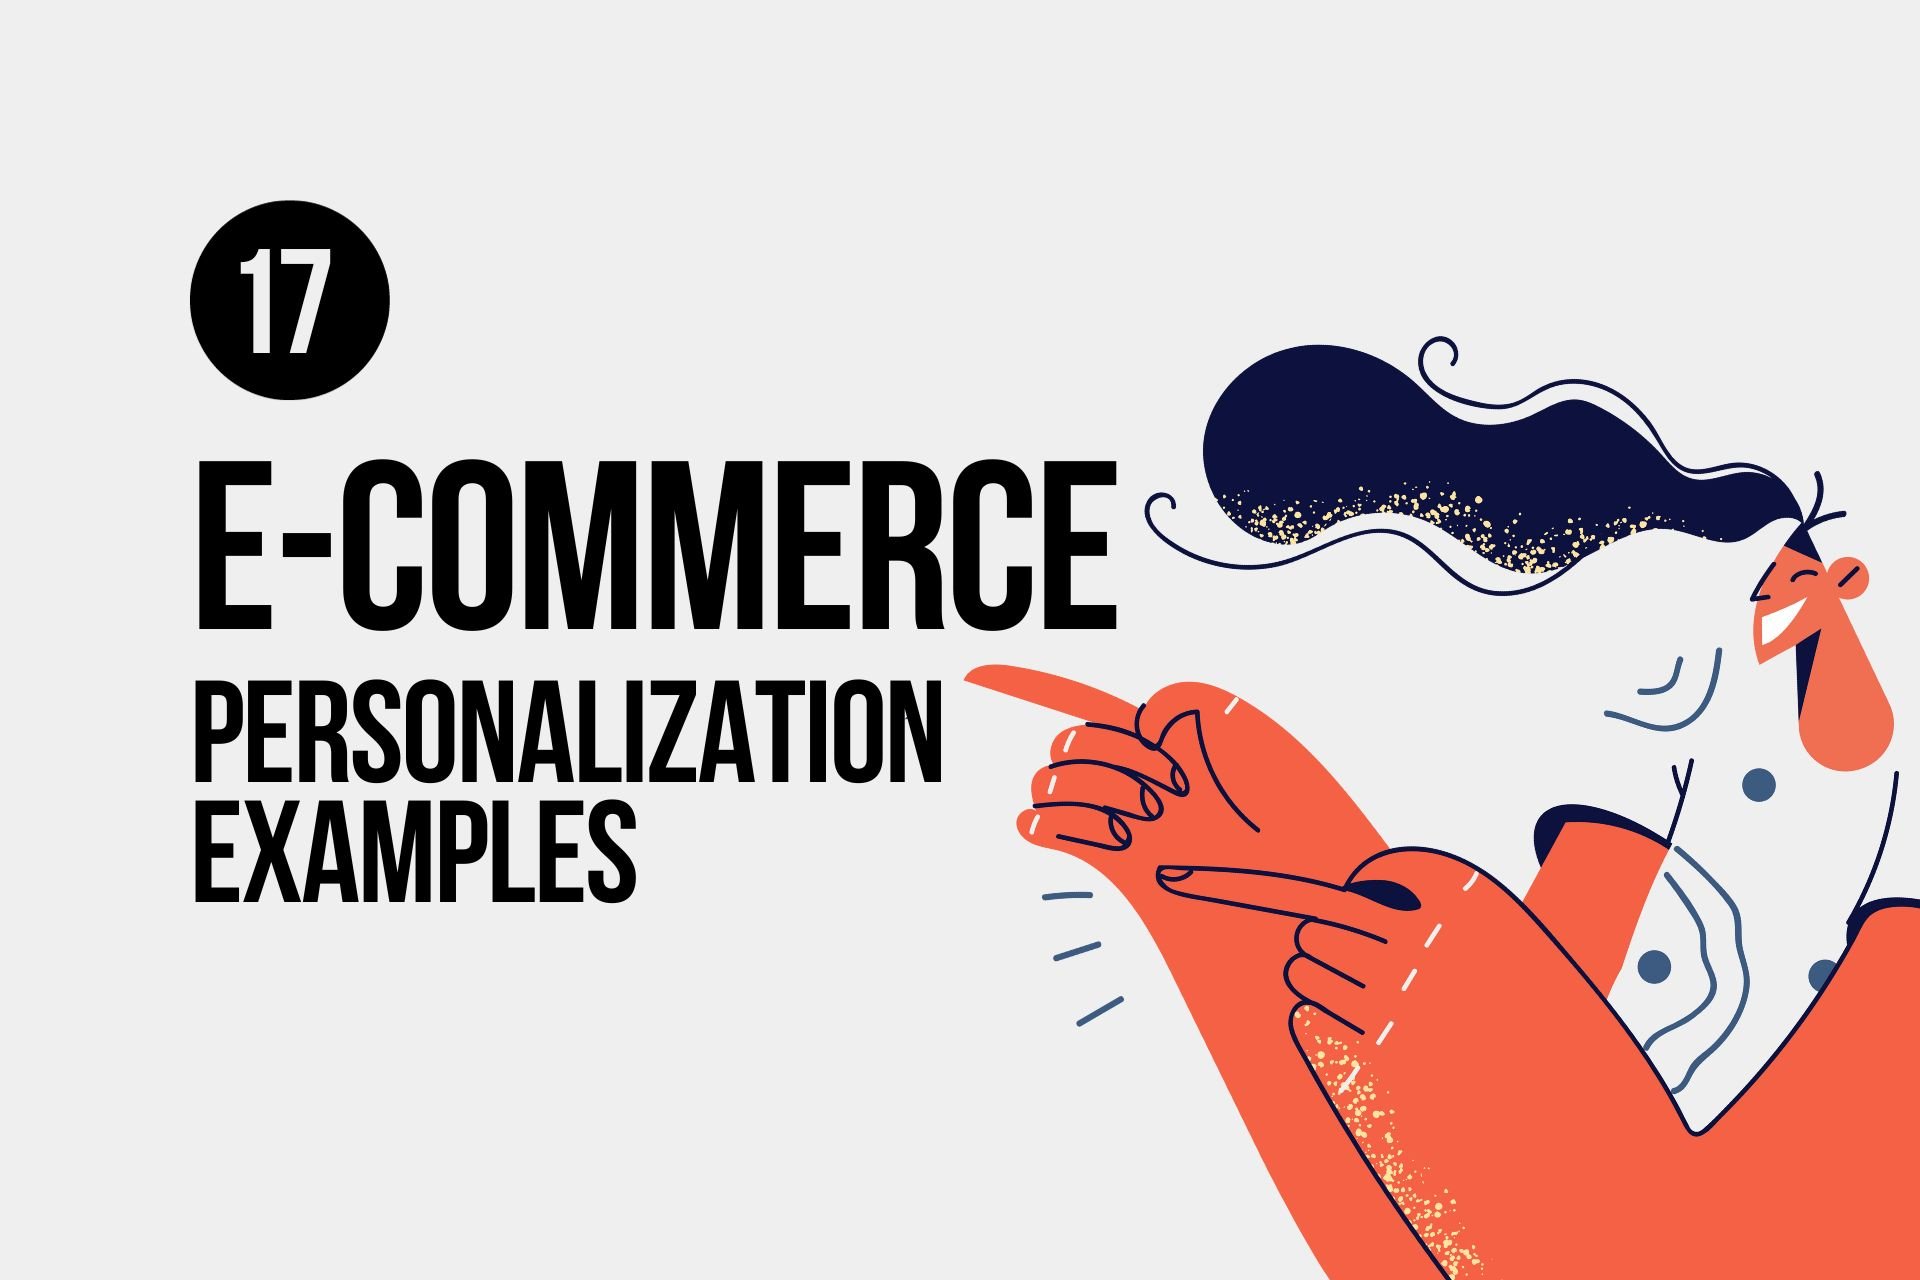 17 E-commerce Personalization Examples